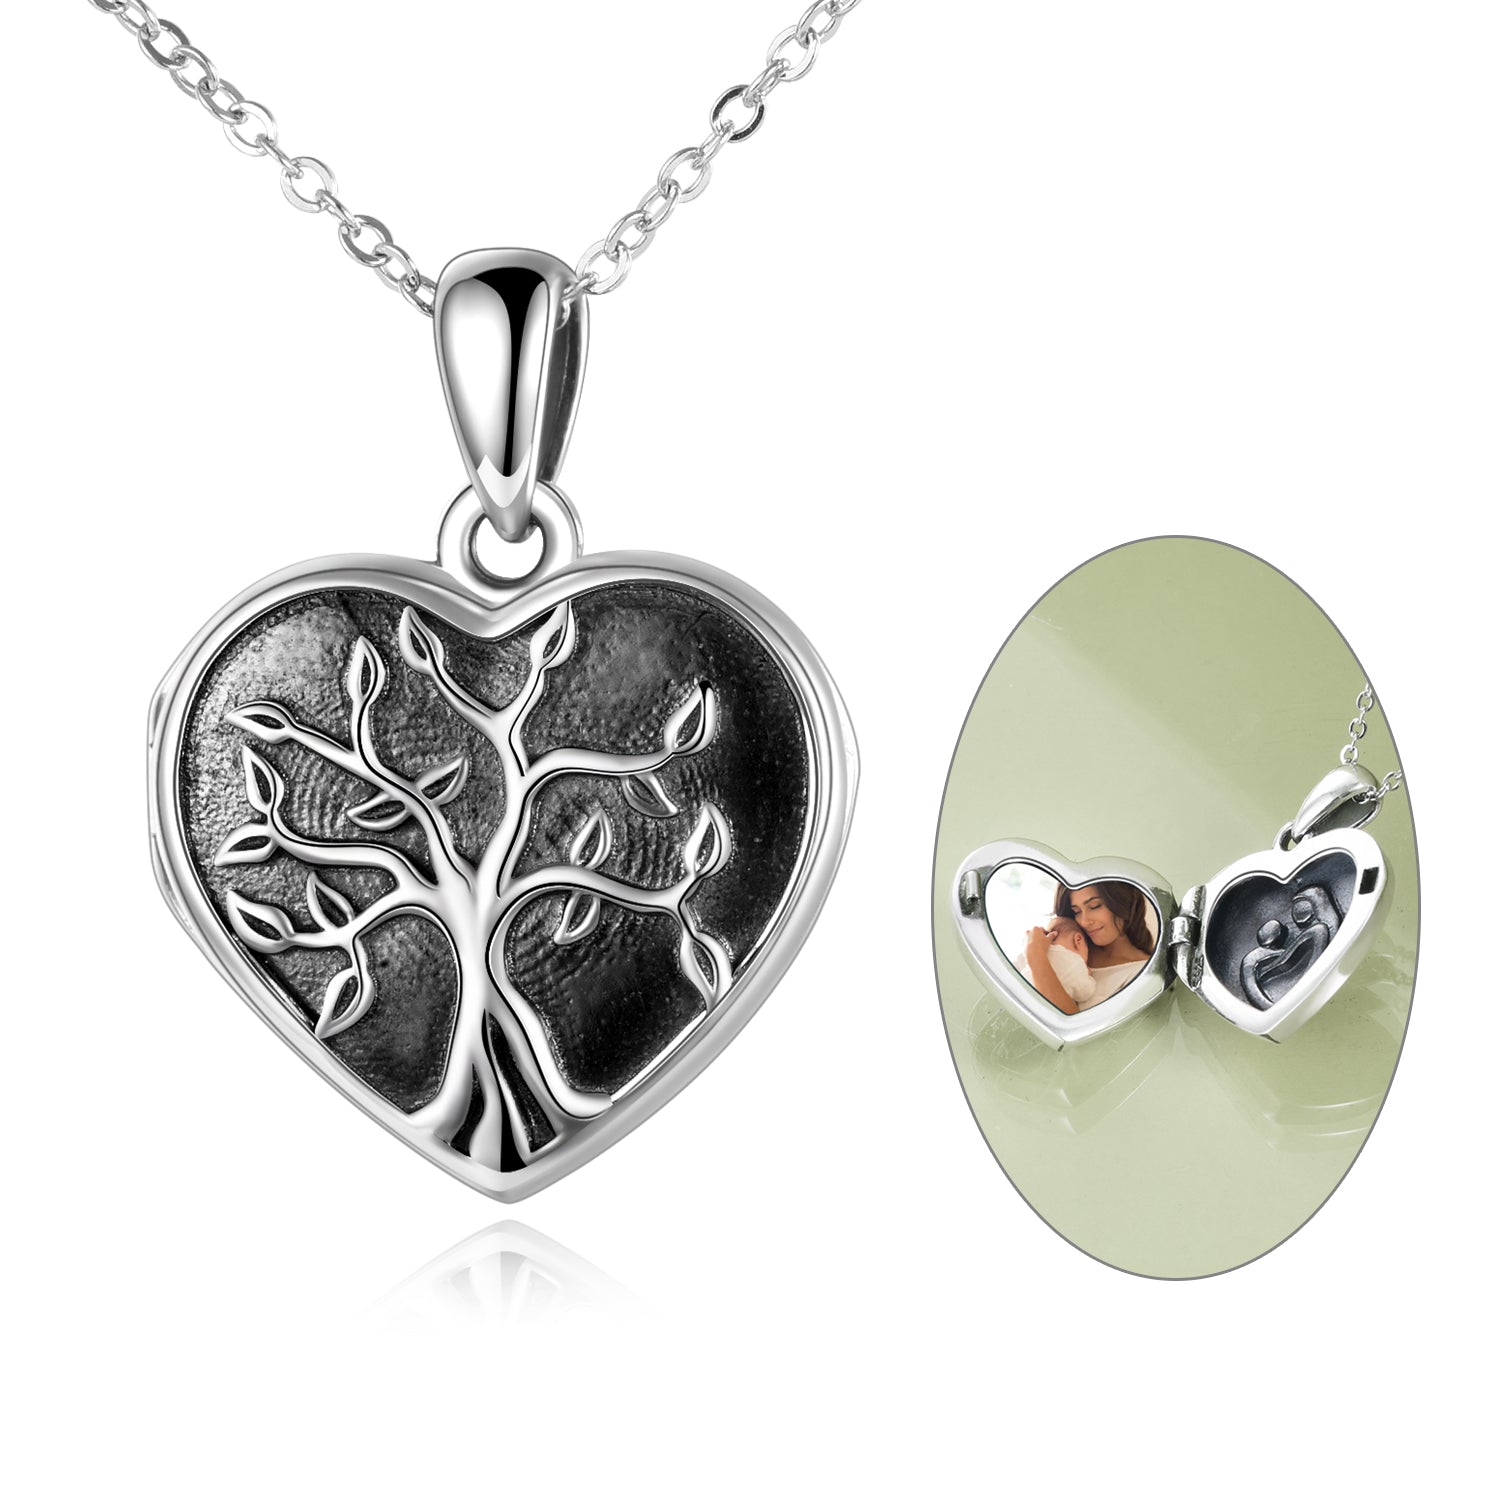 tree-of-life-necklaces-heart-shaped-photo-pendant-family-locket-necklaces-that-hold-pictures-engraved-i-love-you-forever